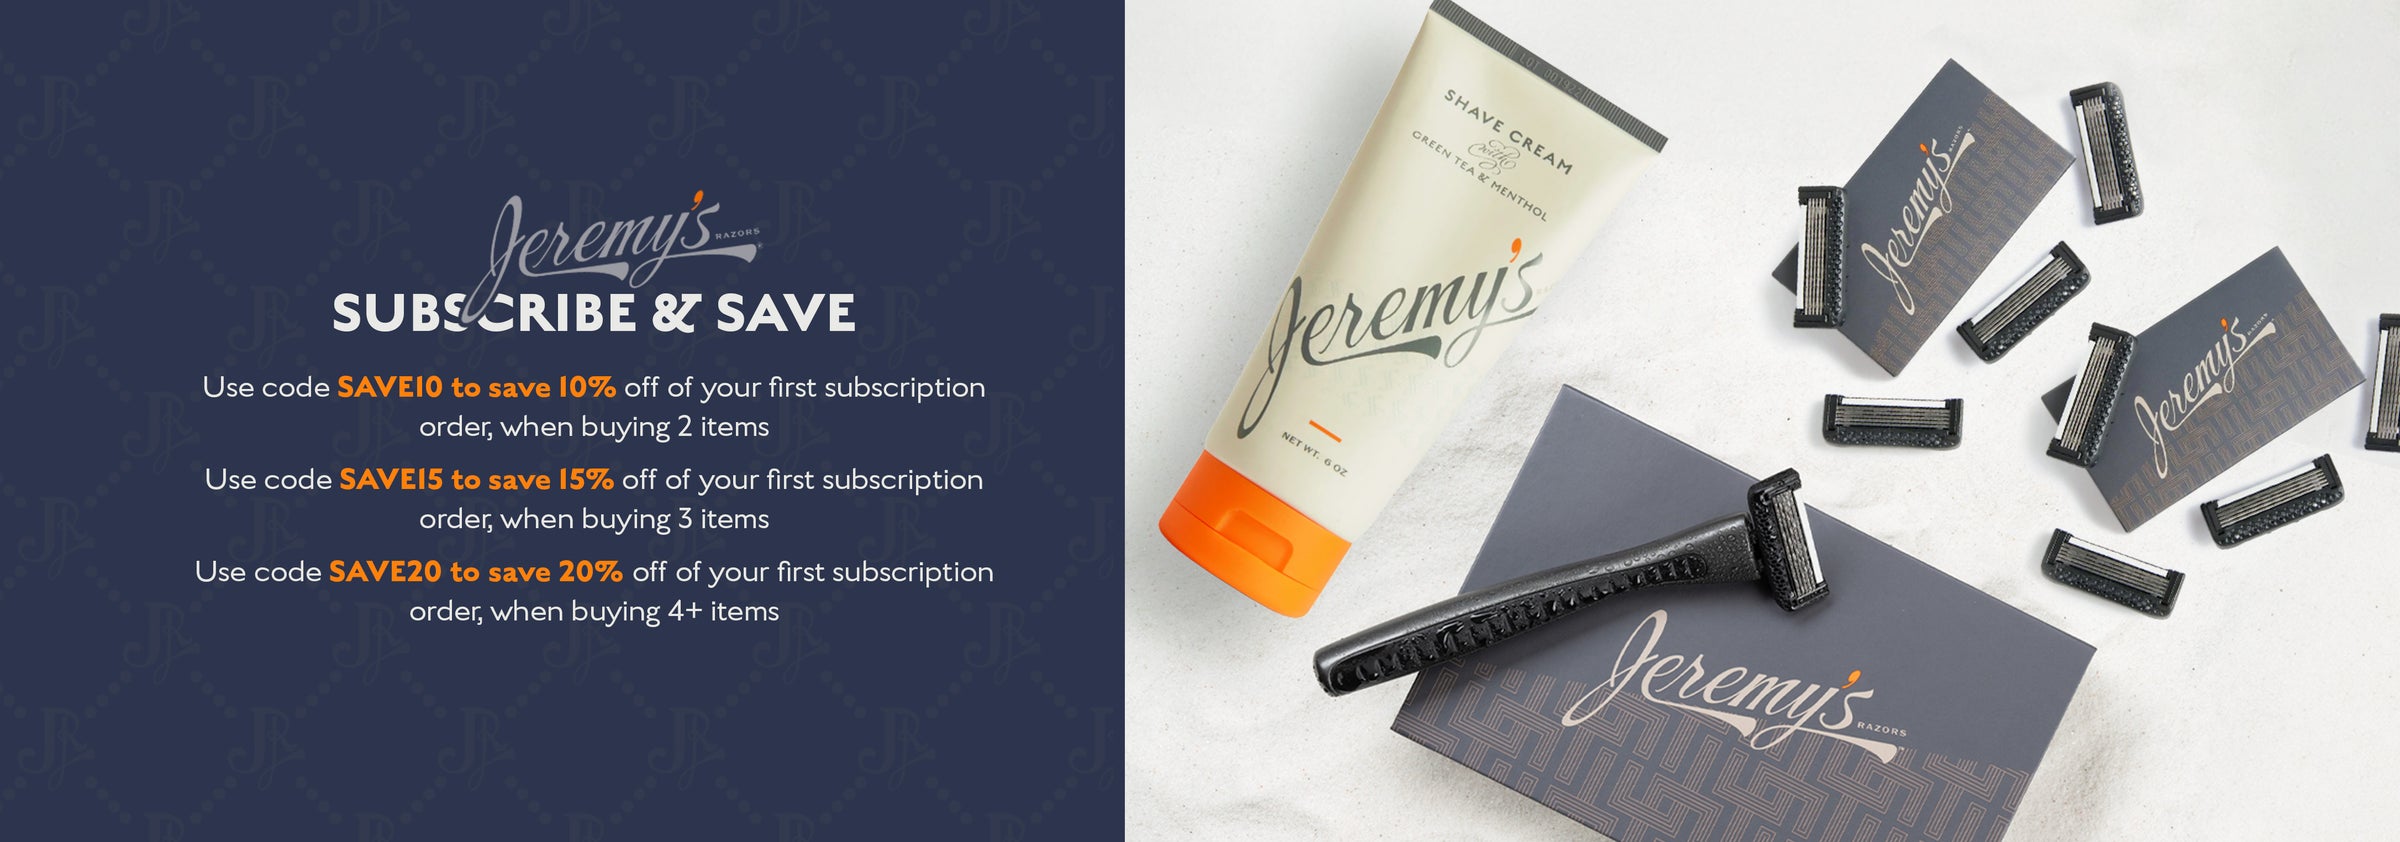 Jeremy's Razors Subscribe & Save. Use code Save10 to save 10% off of your first subscription order, when buying 2 items. Use code Save15 to save 15% off of your first subscription order, when buying 3 items. Use code Save20 to save 20% off of your first subscription order, when buying 4+ items.